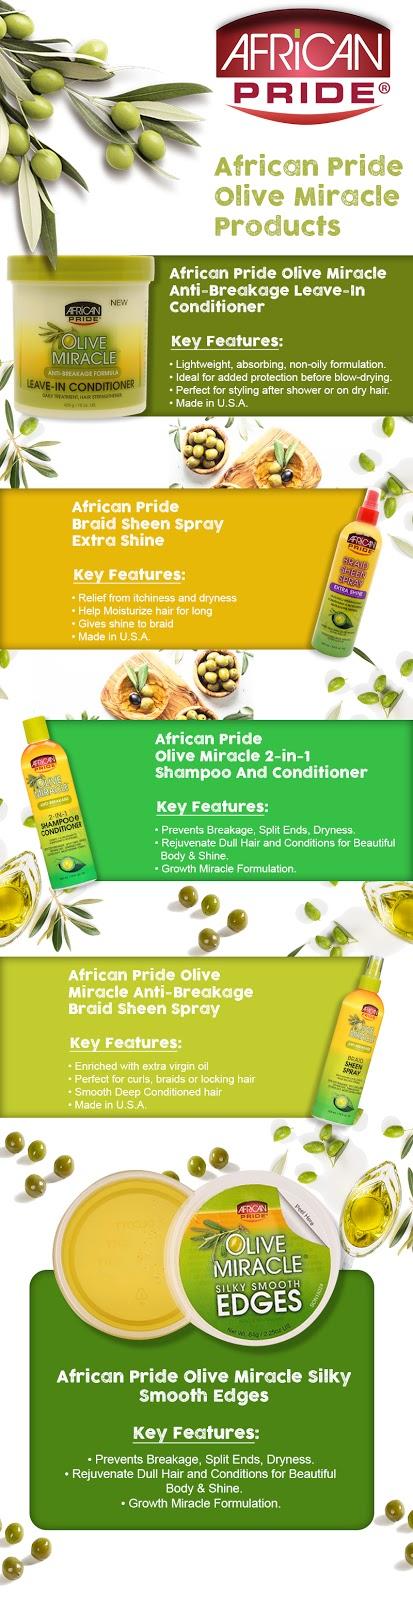 Key Benefits of African Pride Olive Miracle Products